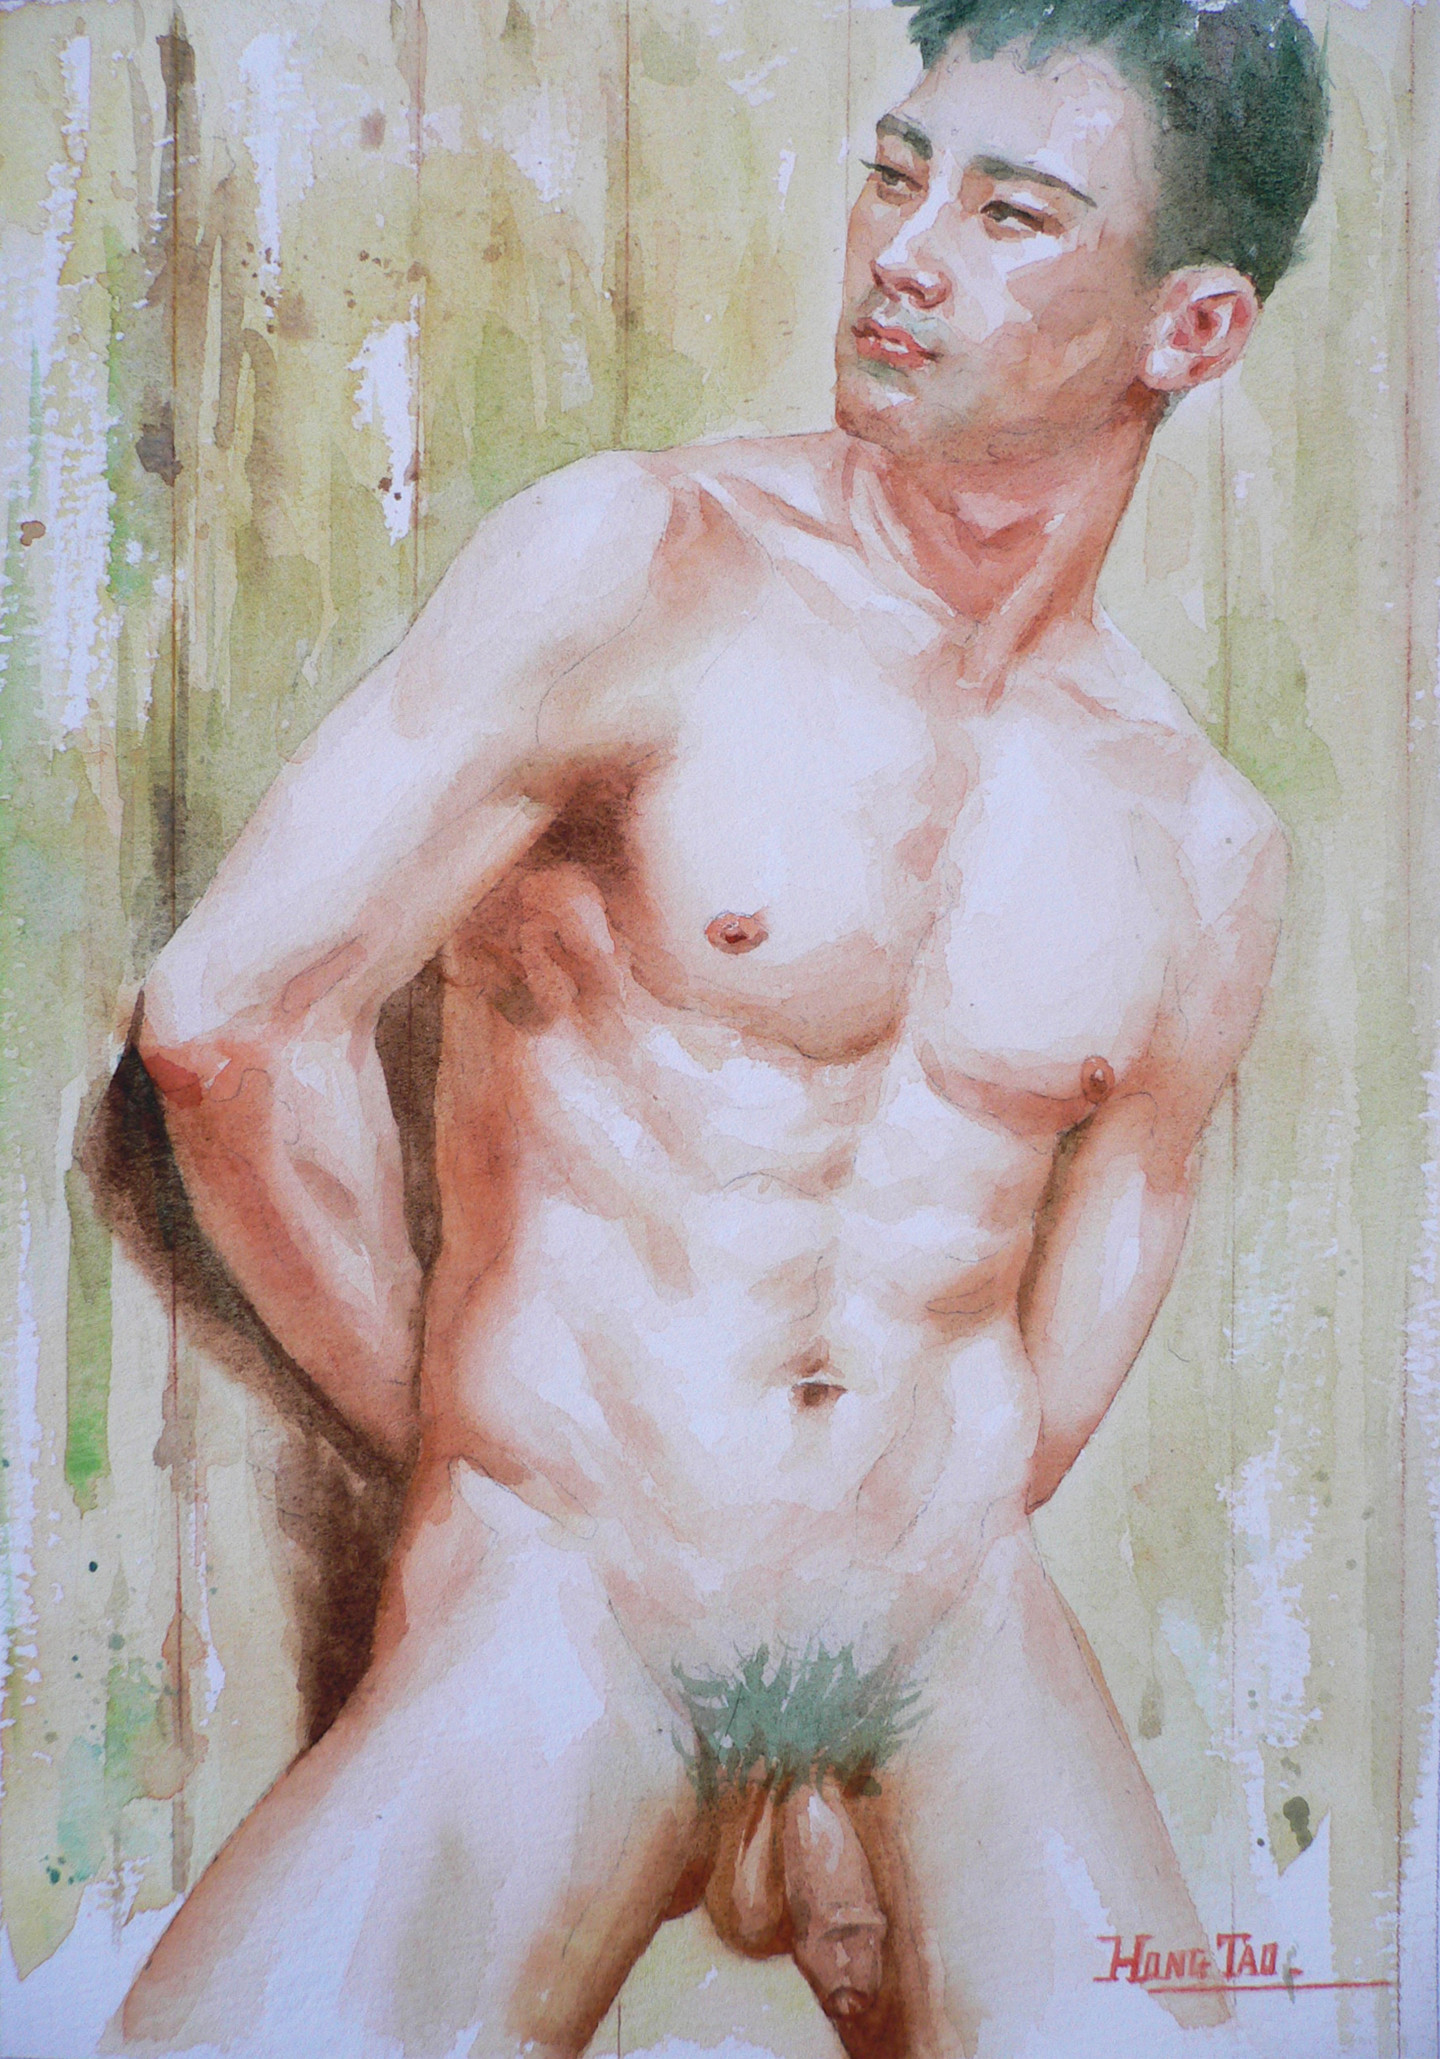 Gay asian gallery, art of the male nude by utopia